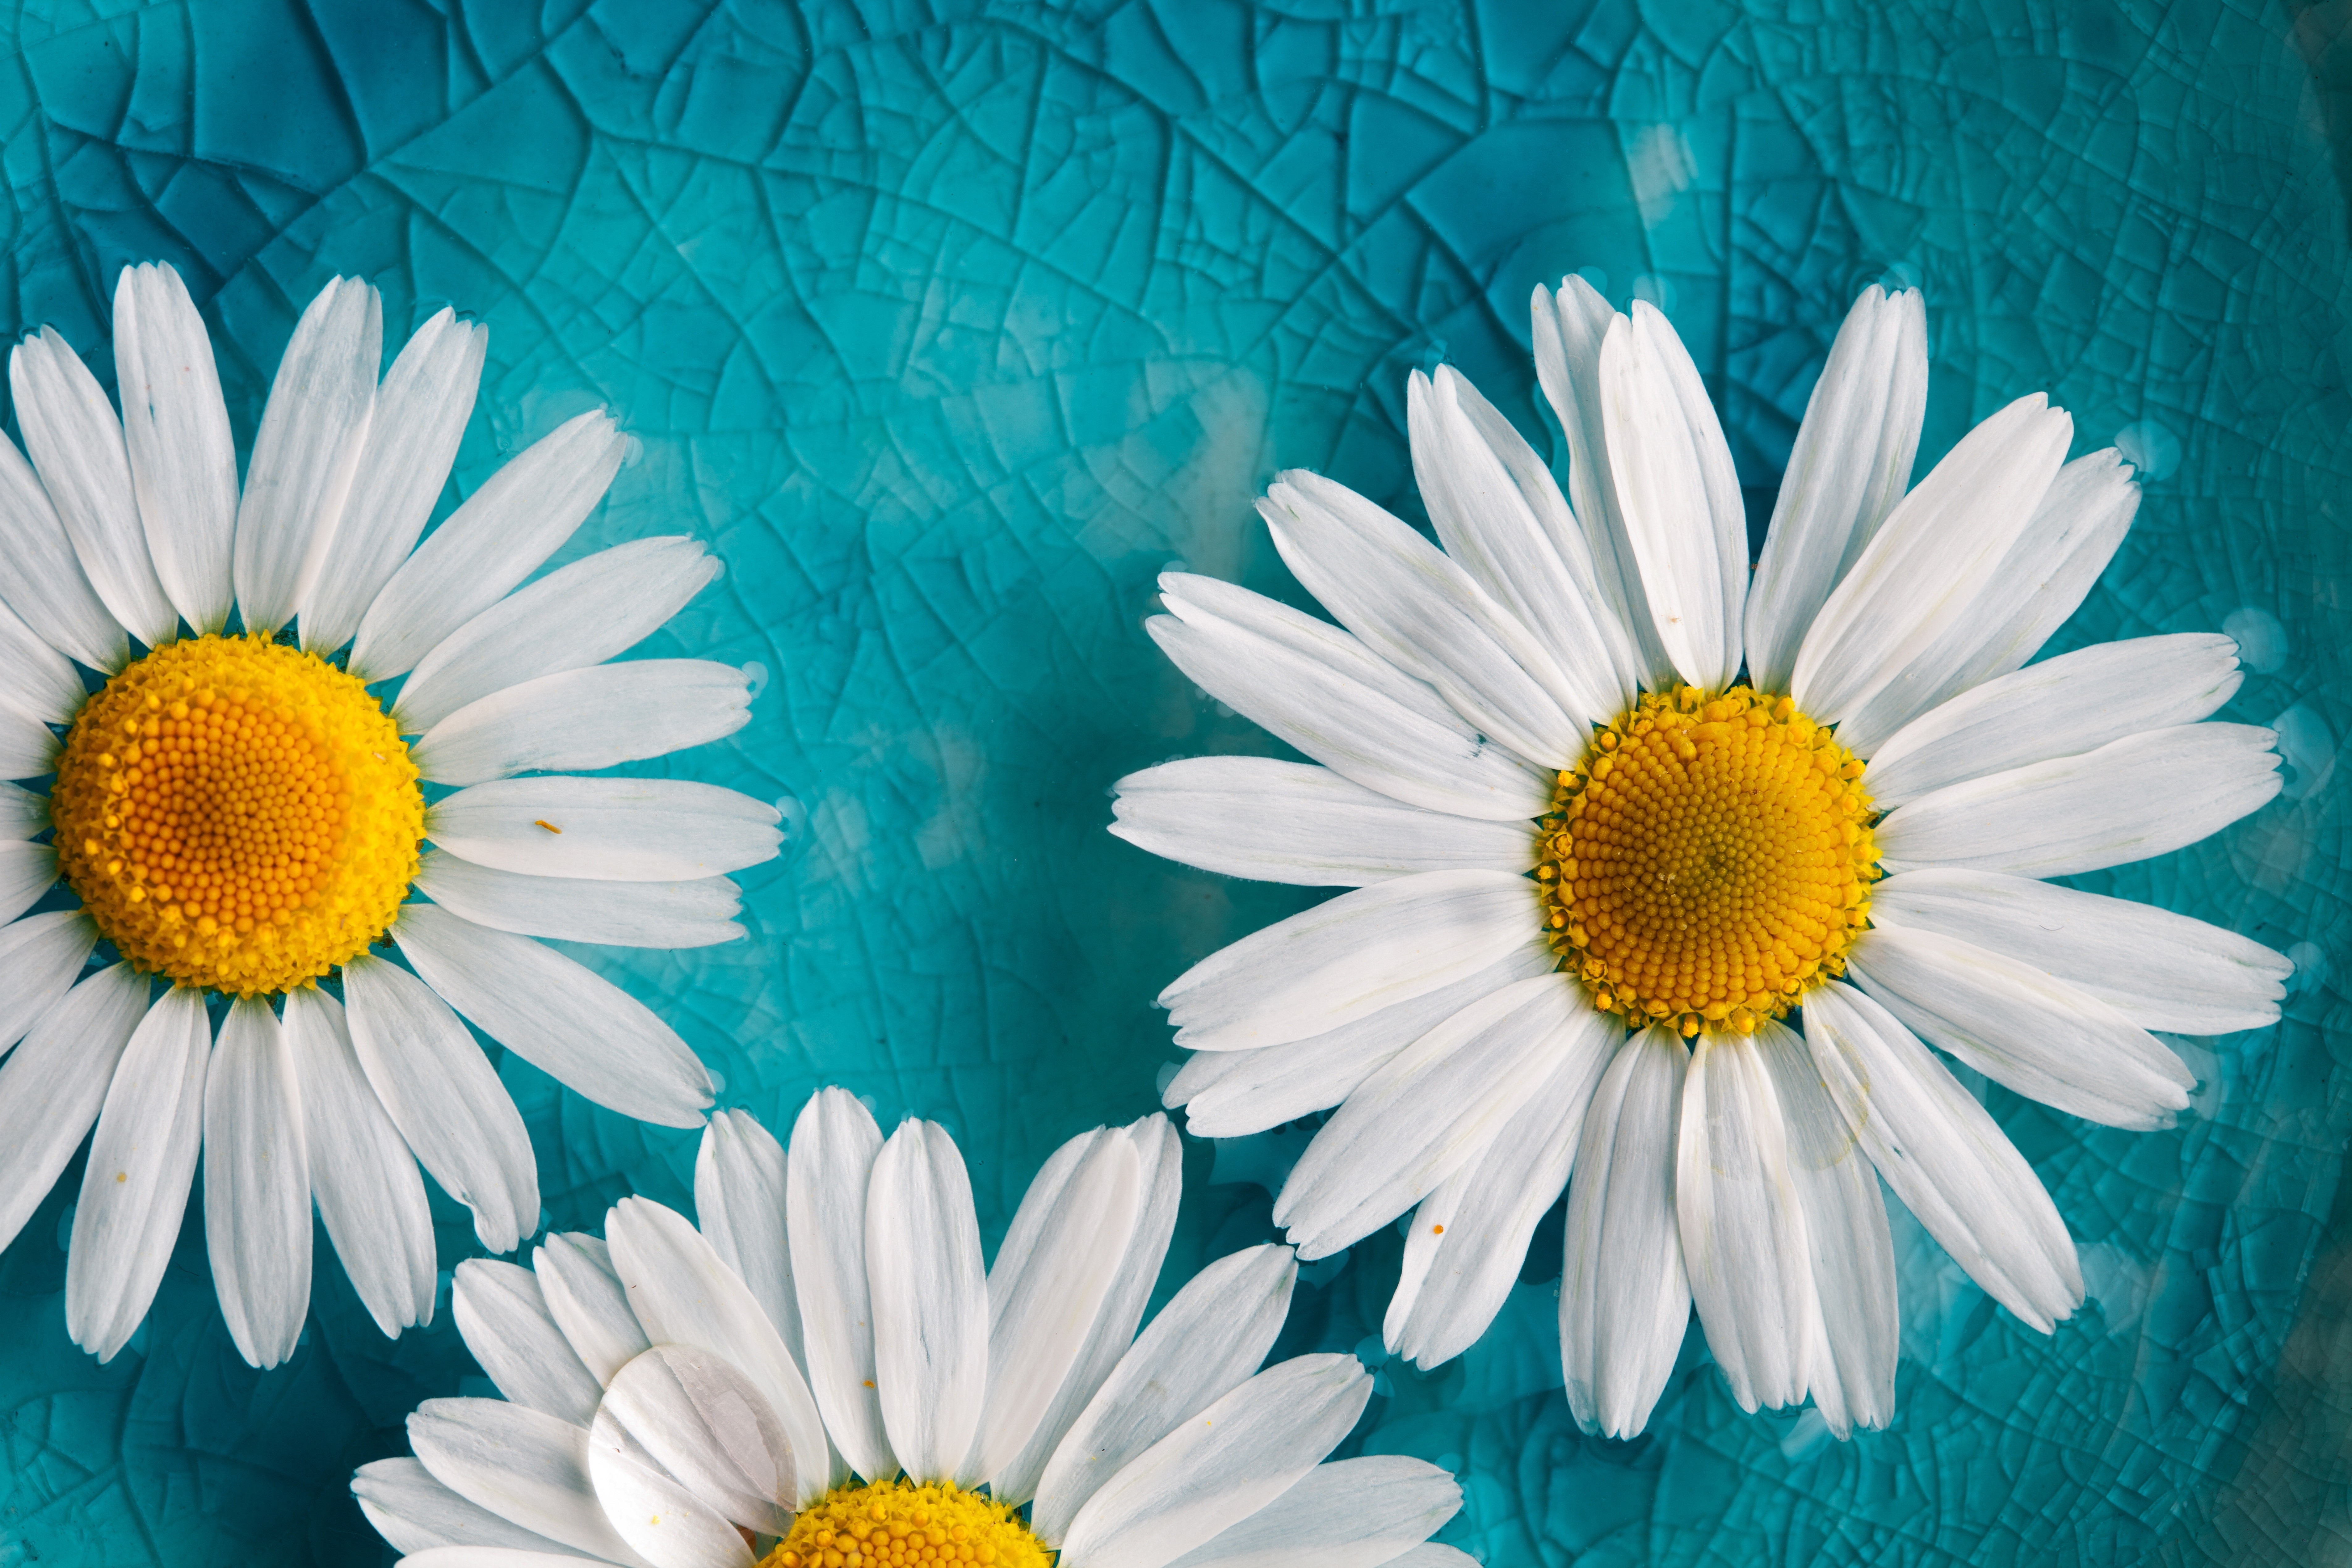 General 7616x5077 macro daisies cyan turquoise yellow top view plants cyan background